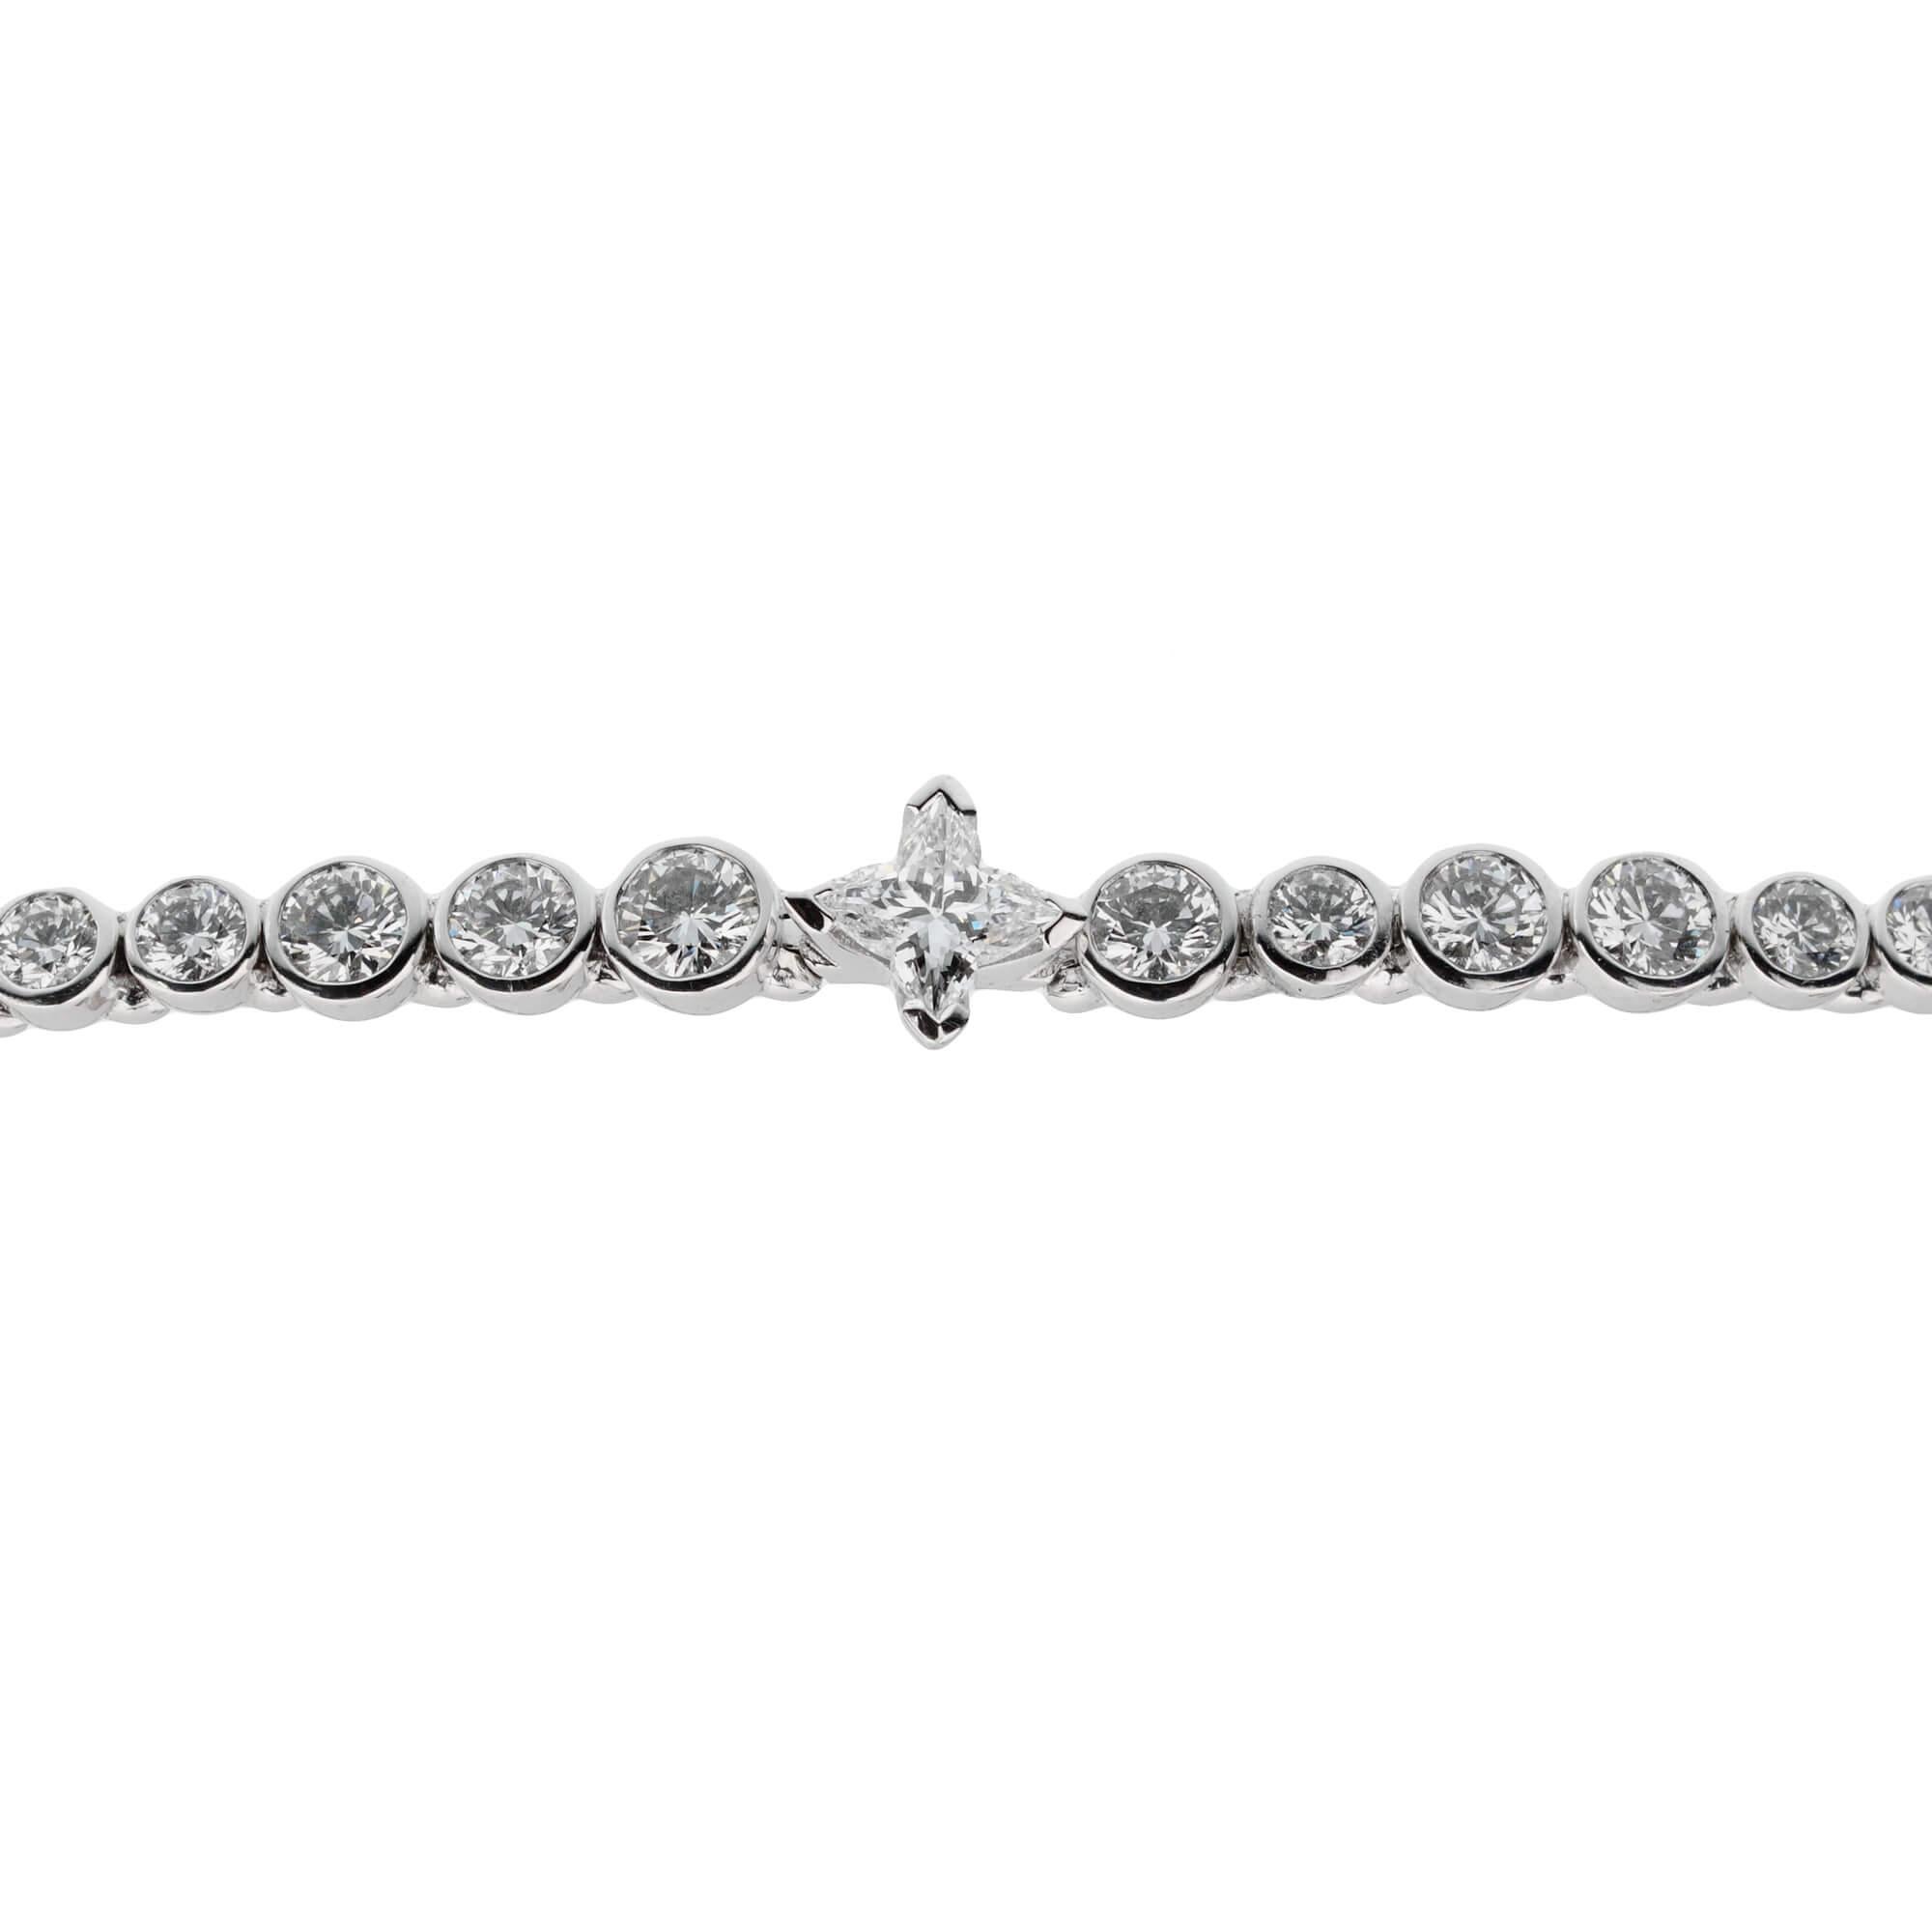 An incredible tennis bracelet by Louis Vuitton showcasing alternating sized round brilliant cut diamonds, iconic Les Ardentes shaped central diamond and baguette diamonds in shimmering 18k white gold.

5ct Appx Diamond Weight